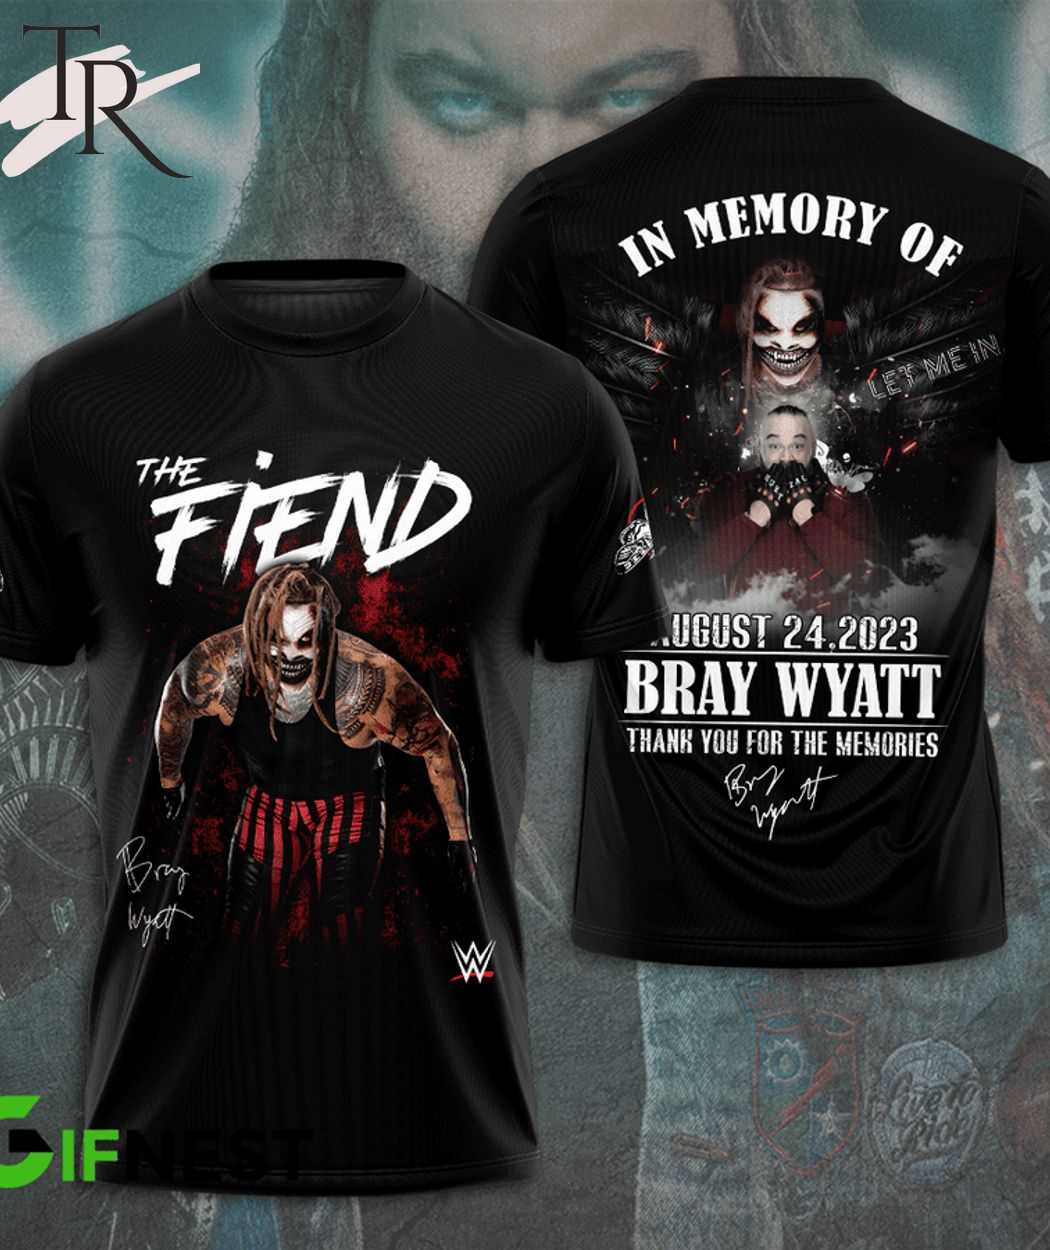 https://images.torunstyle.com/wp-content/uploads/2023/08/28090310/the-fiend-in-memory-of-august-24-2023-bray-wyatt-thank-you-for-the-memories-t-shirt-1-Usncn.jpg